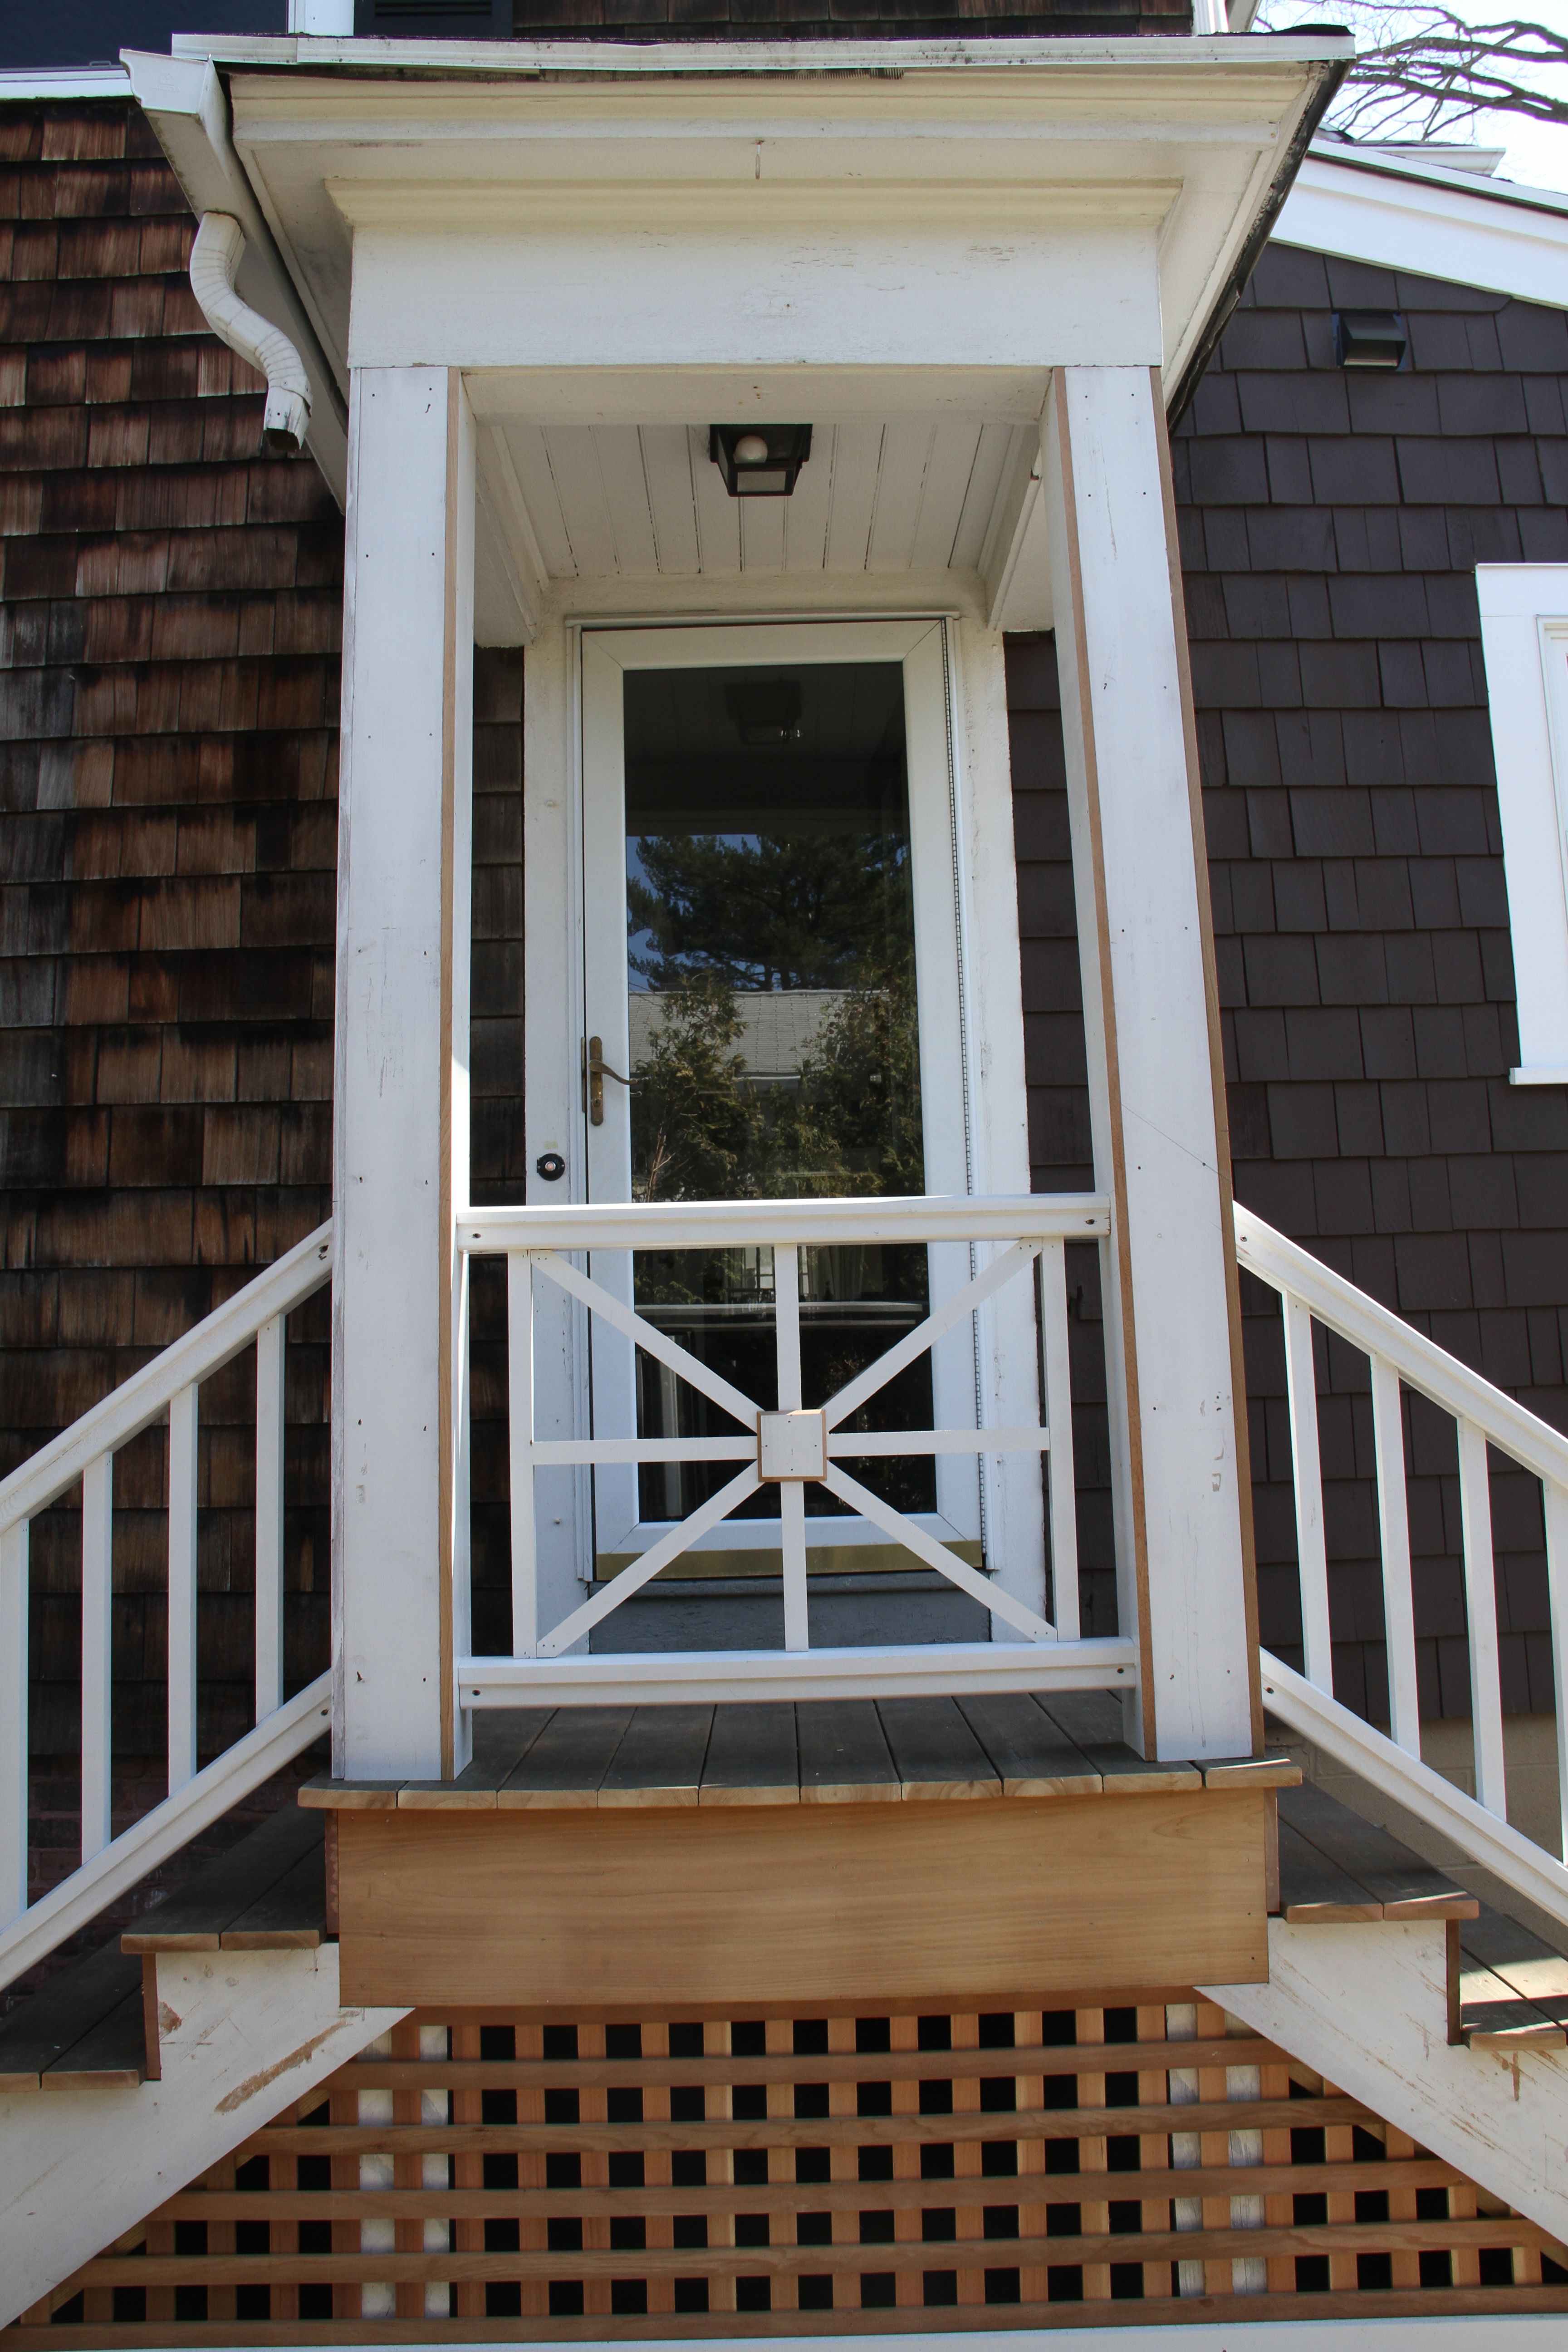 AFTER: We still have the business of a new storm door to install (the one pictured above didn't really survive the remodel and is terribly hard to open and close), but the overall look of the entry gives instant curb appeal.